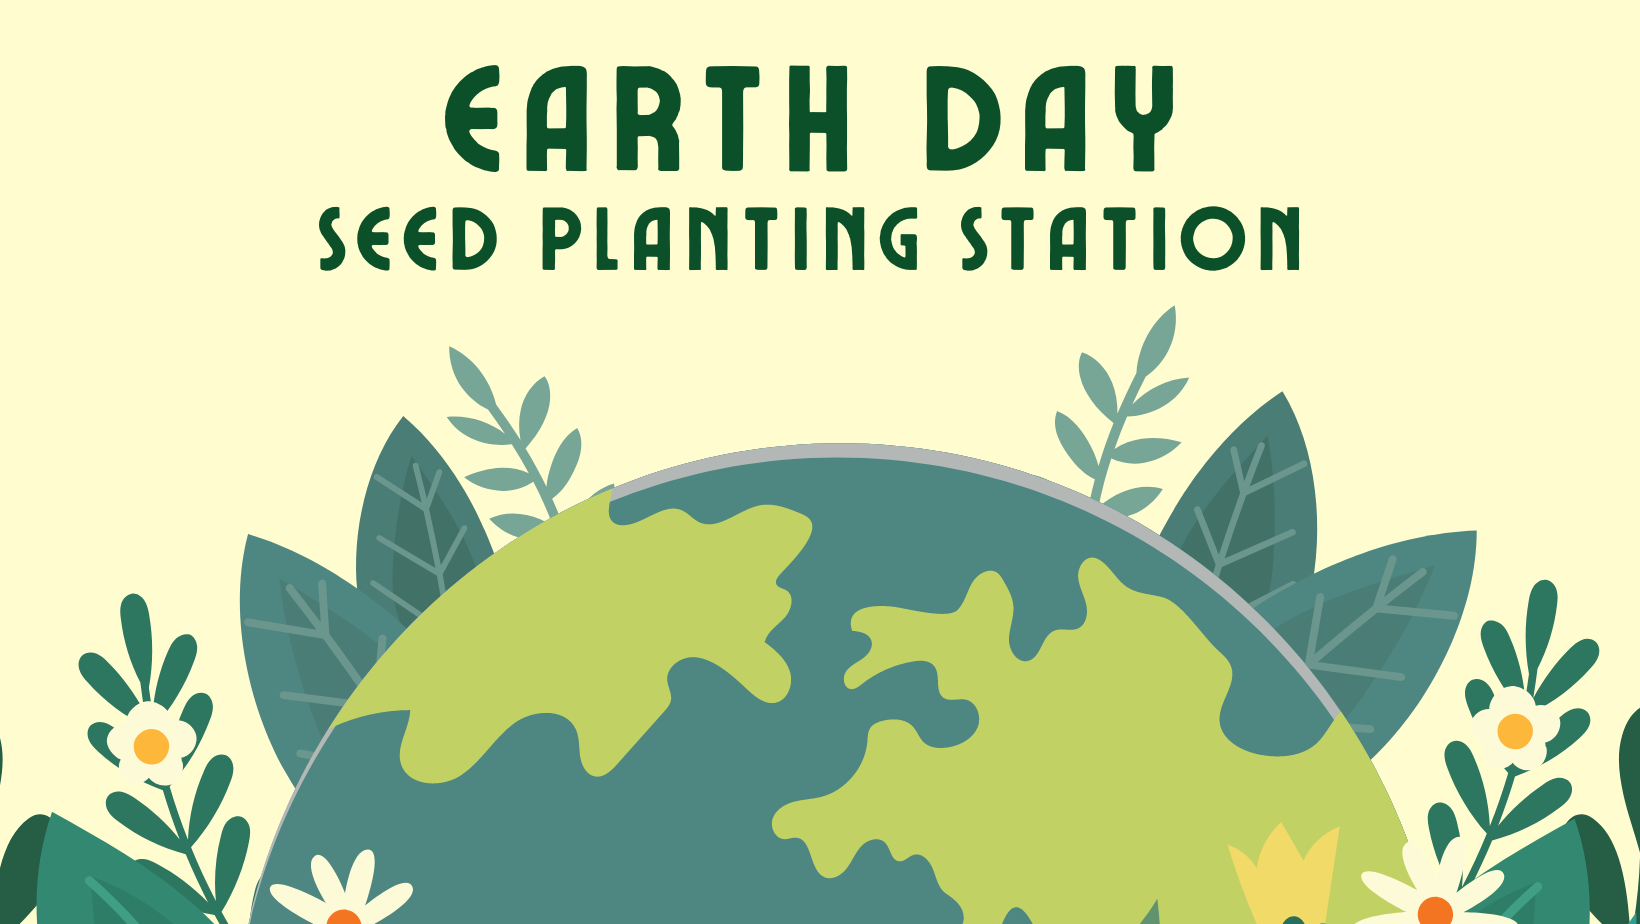 Earth Day Seed Planting Station. Drawing of earth and plants